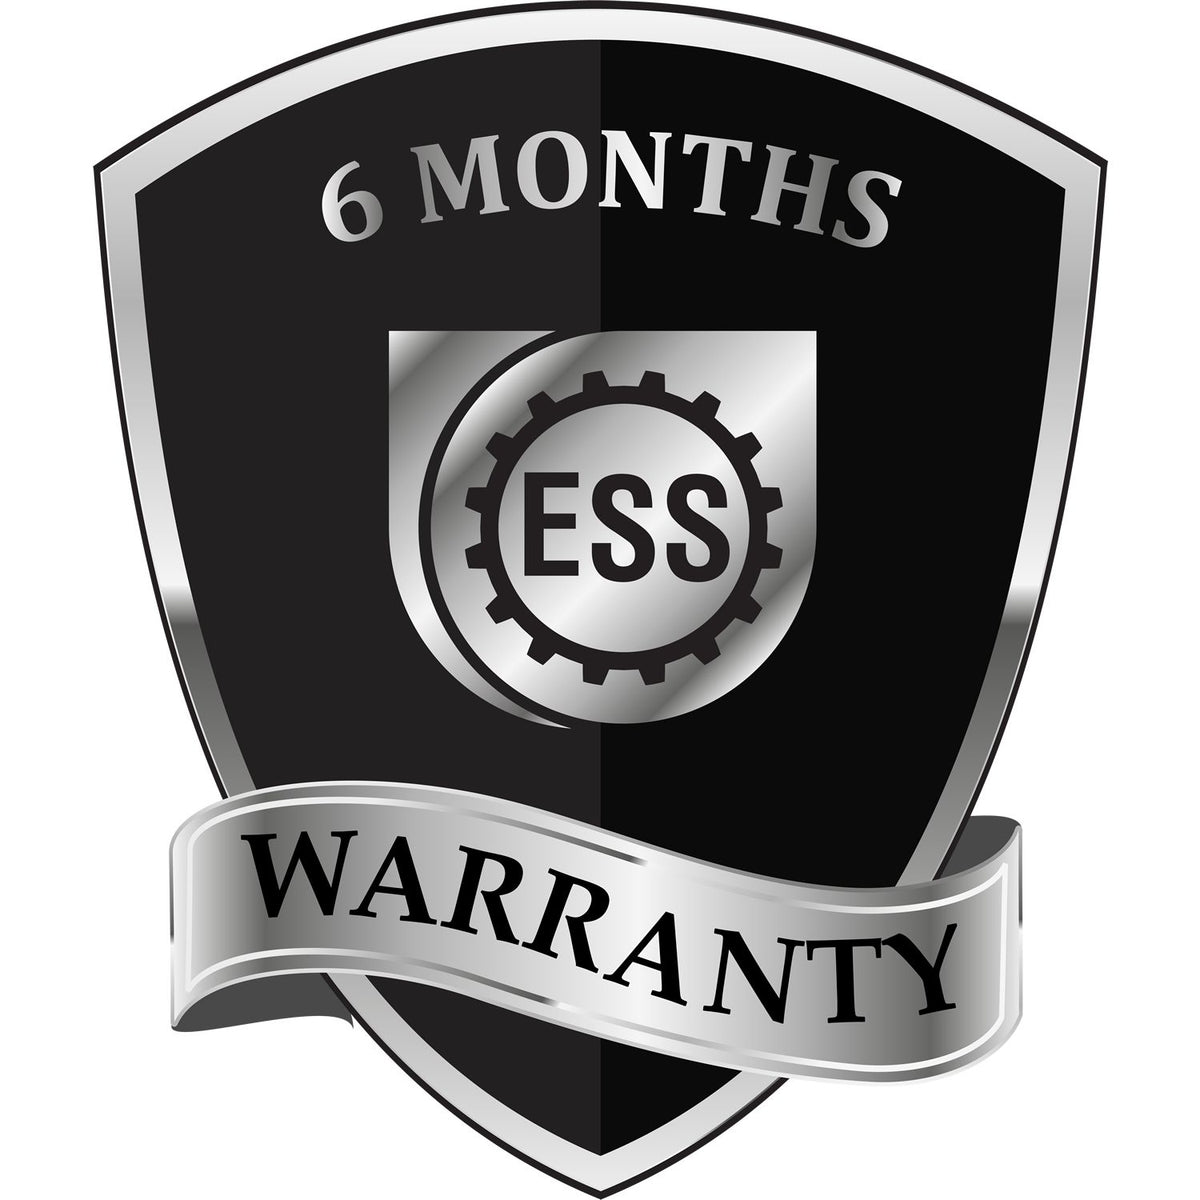 A badge or emblem showing a warranty icon for the Premium MaxLight Pre-Inked Montana Engineering Stamp